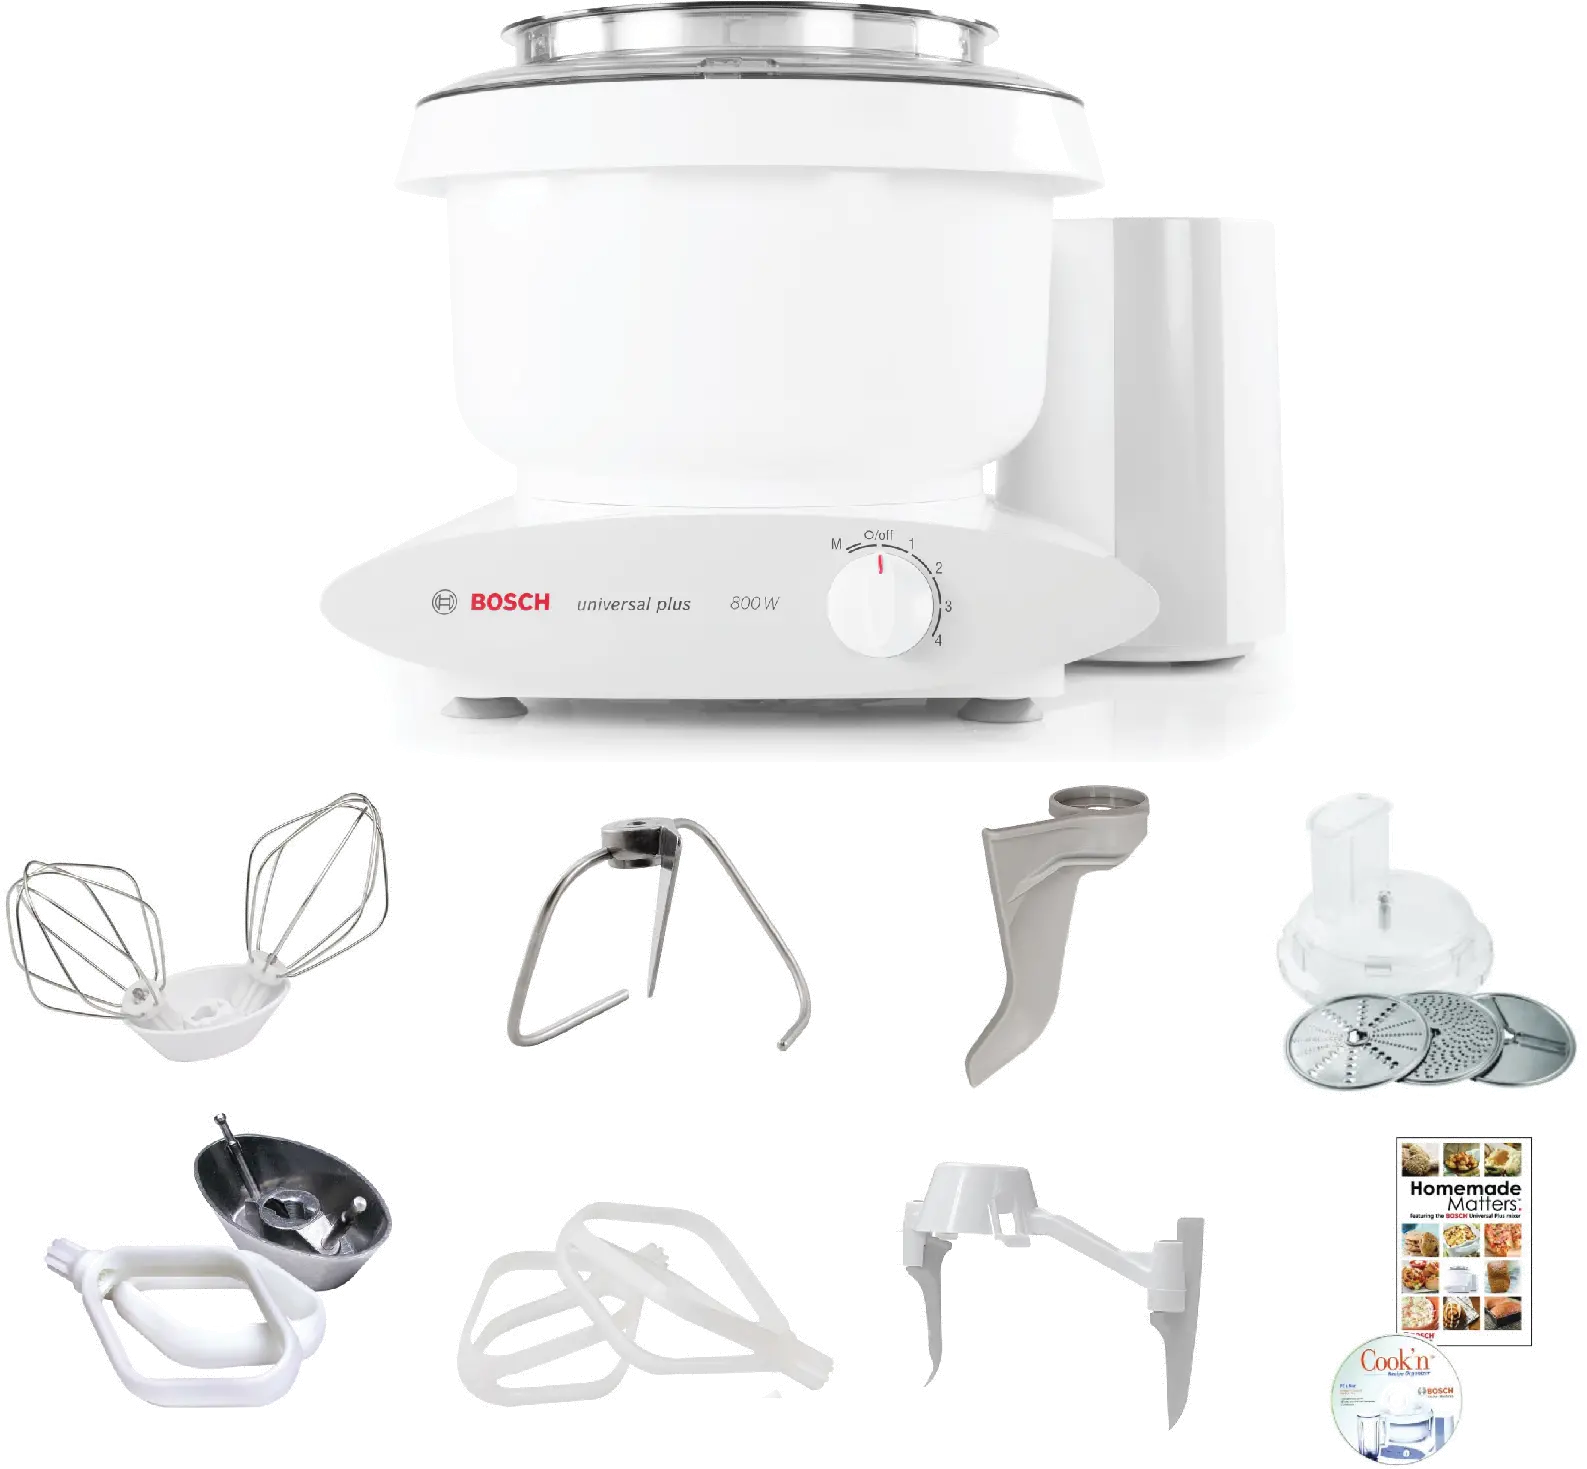 https://static.rcwilley.com/products/111556325/Bosch-Universal-Plus-Mixer-Deluxe-Bundle-rcwilley-image1.webp